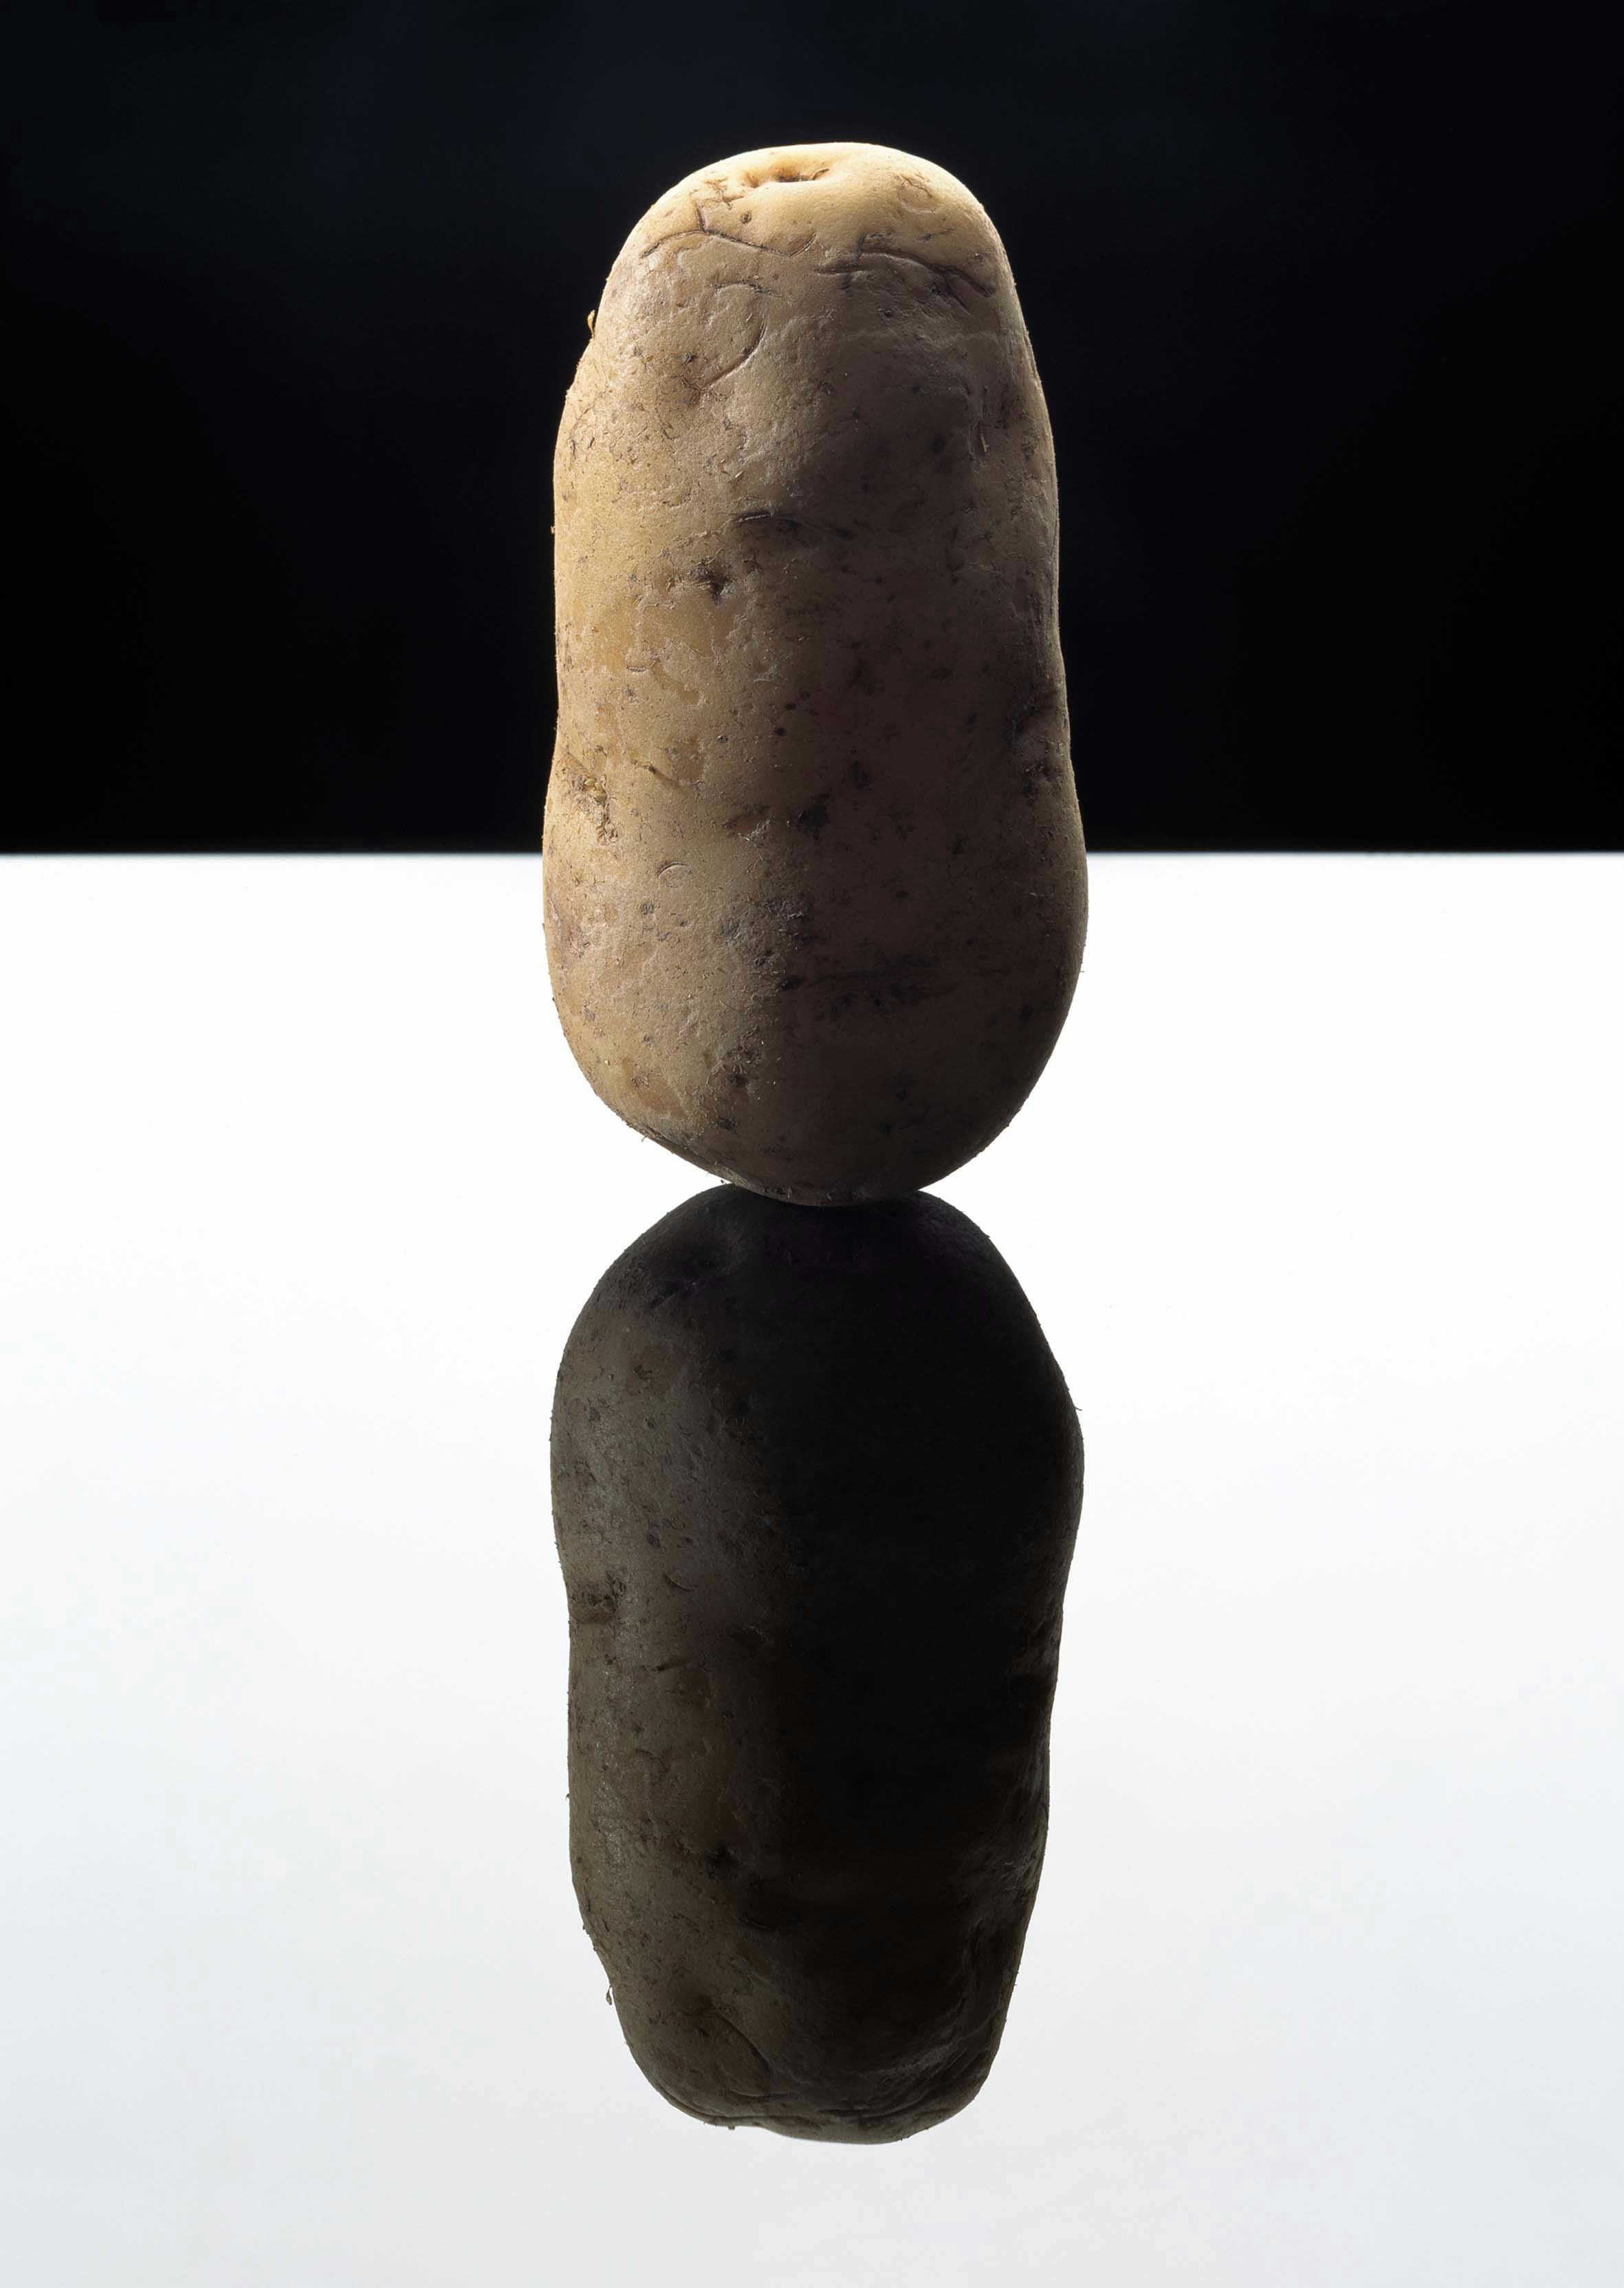 Potato, 2003 © Blommers & Schumm, courtesy of the Foam Collection